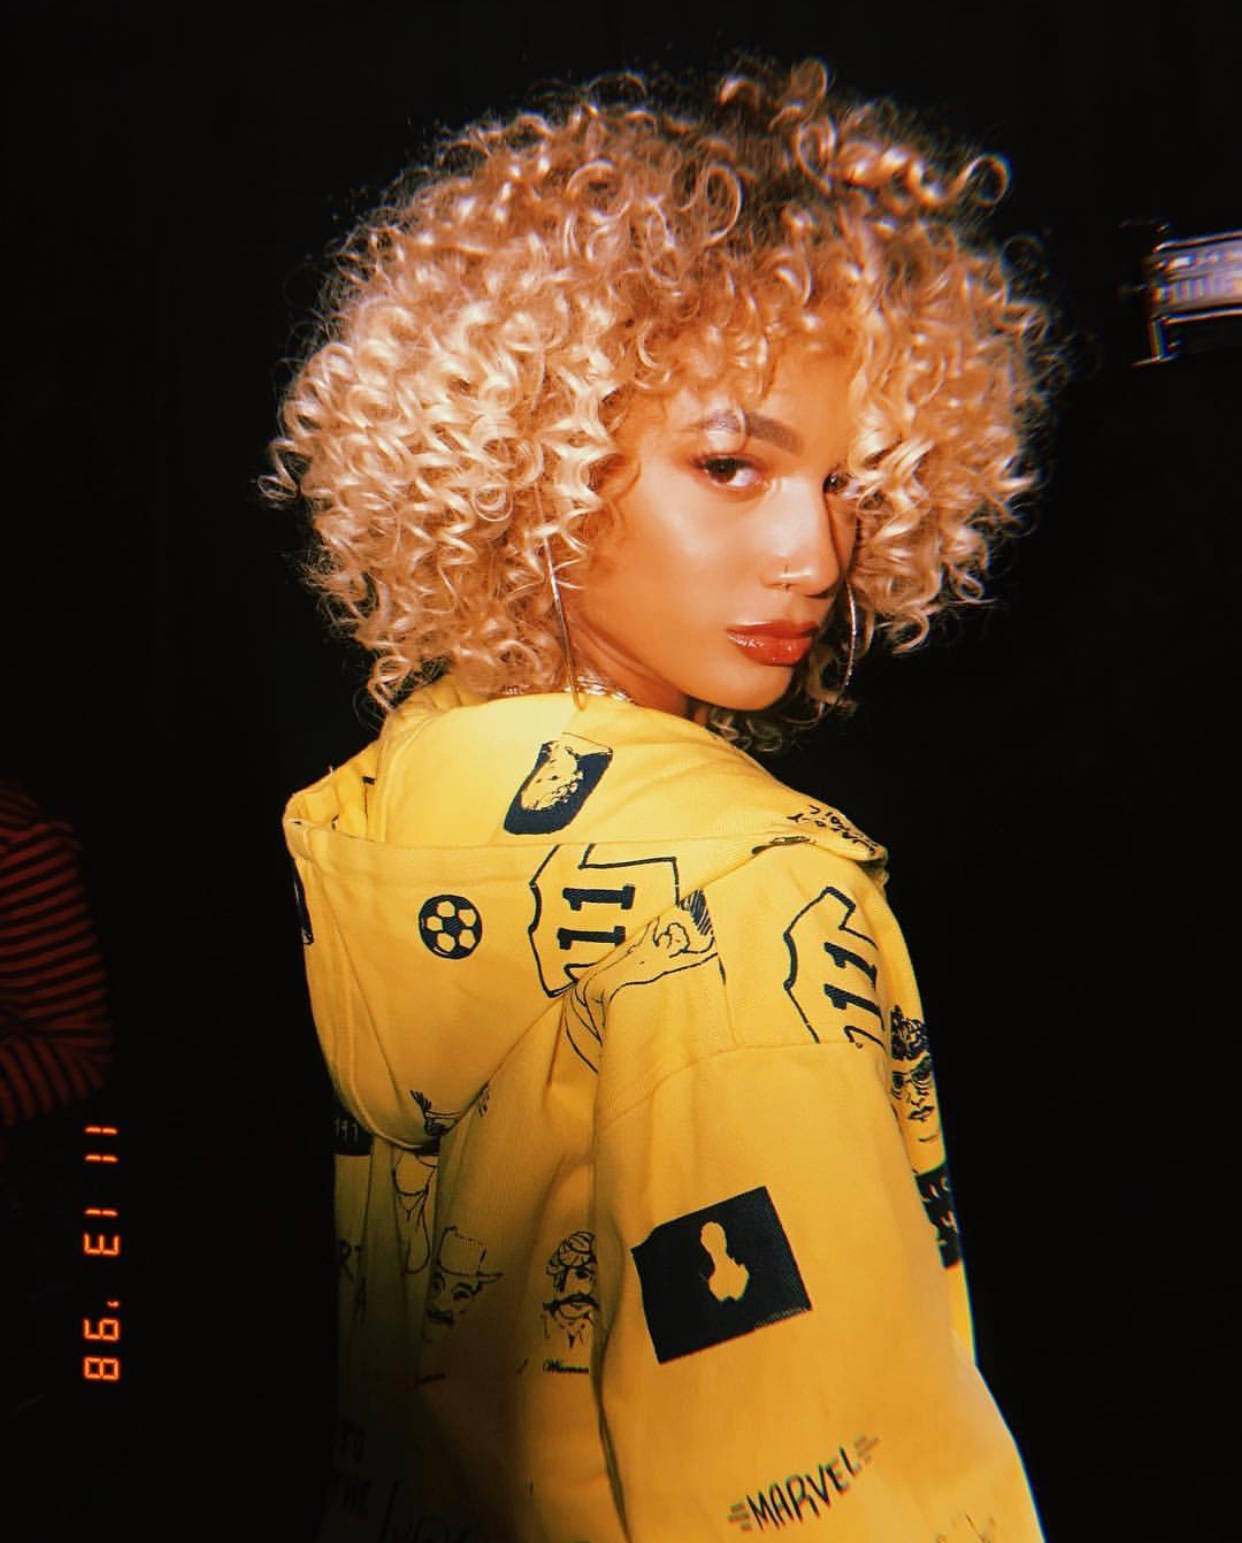 A Woman In A Yellow Jacket With Curly Hair Wallpaper